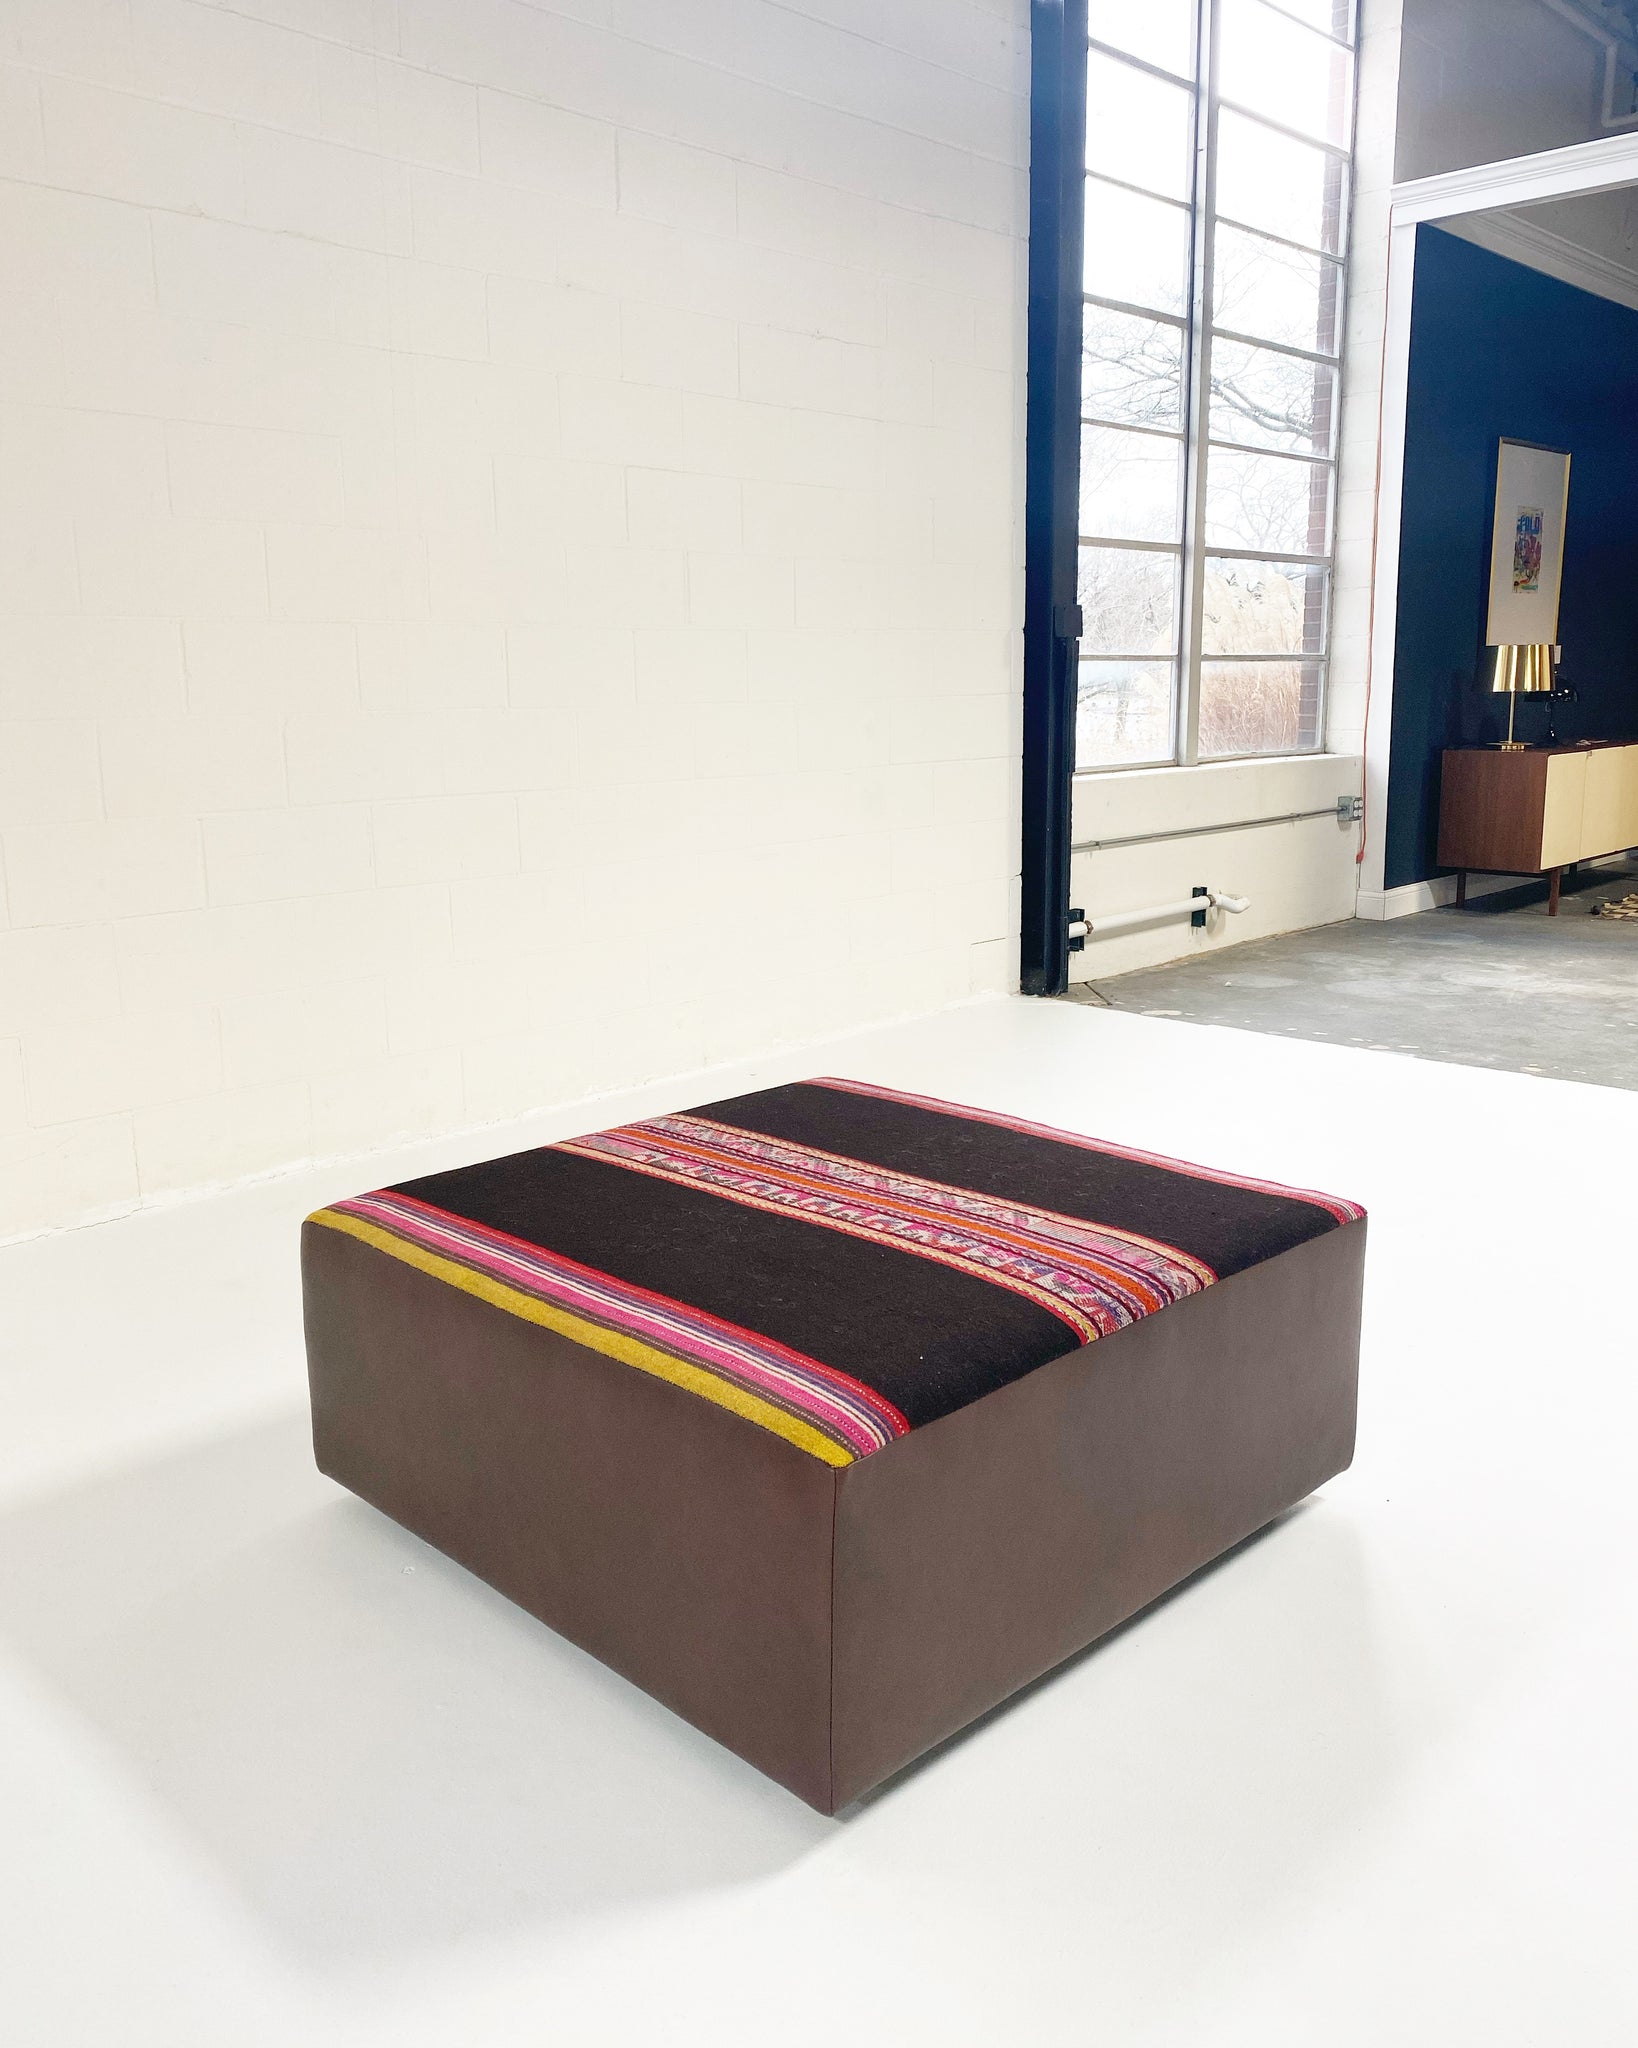 One-of-a-Kind Ottoman with Vintage Peruvian Textile, Black